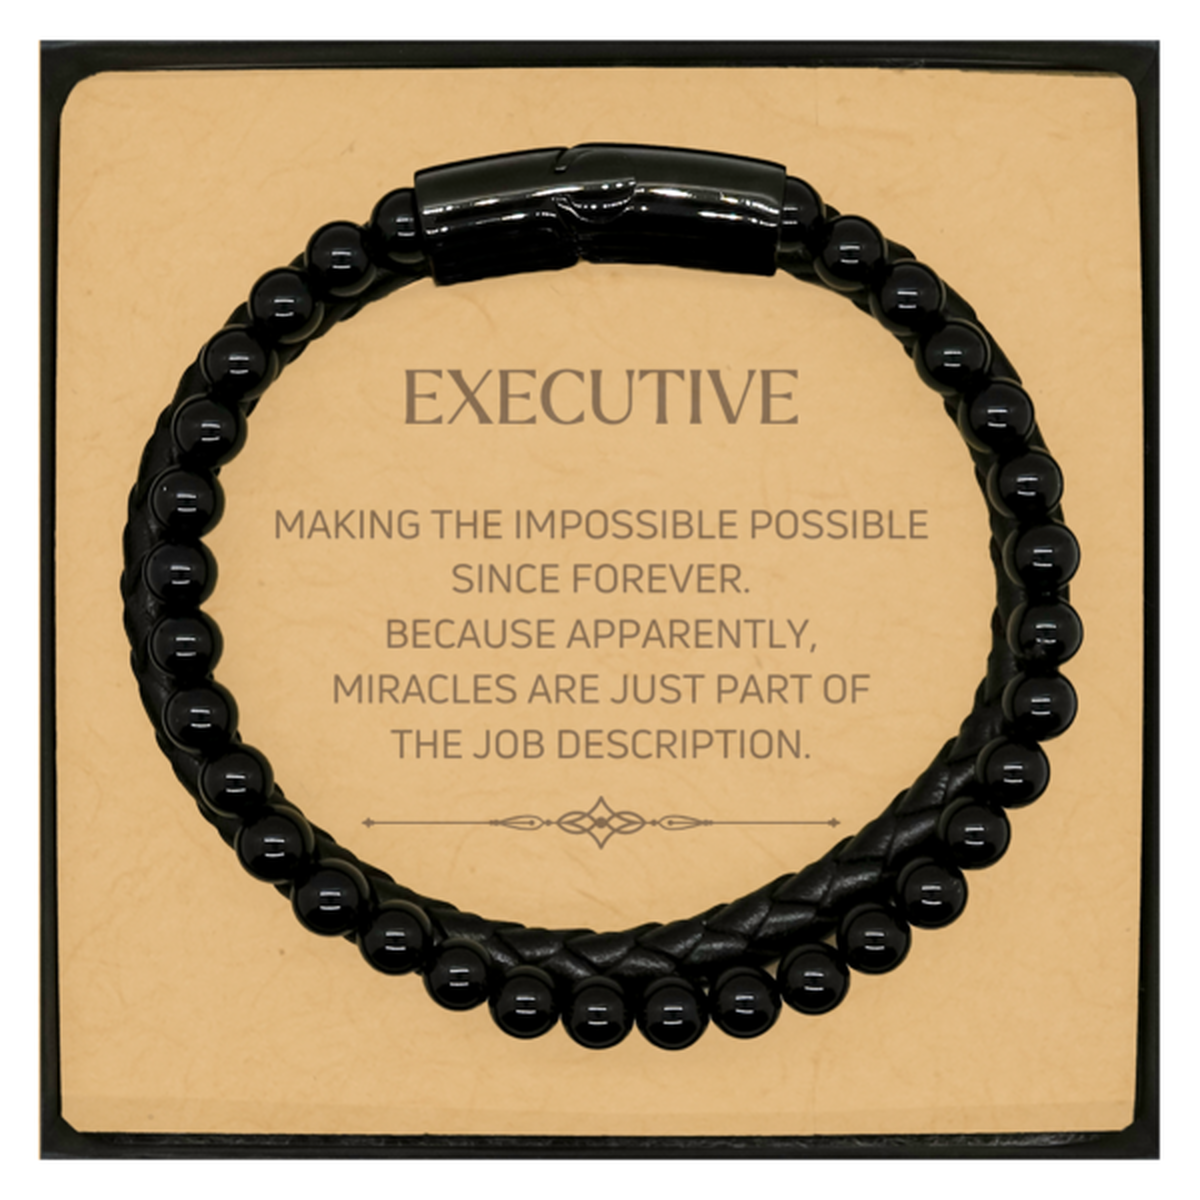 Funny Executive Gifts, Miracles are just part of the job description, Inspirational Birthday Christmas Stone Leather Bracelets For Executive, Men, Women, Coworkers, Friends, Boss